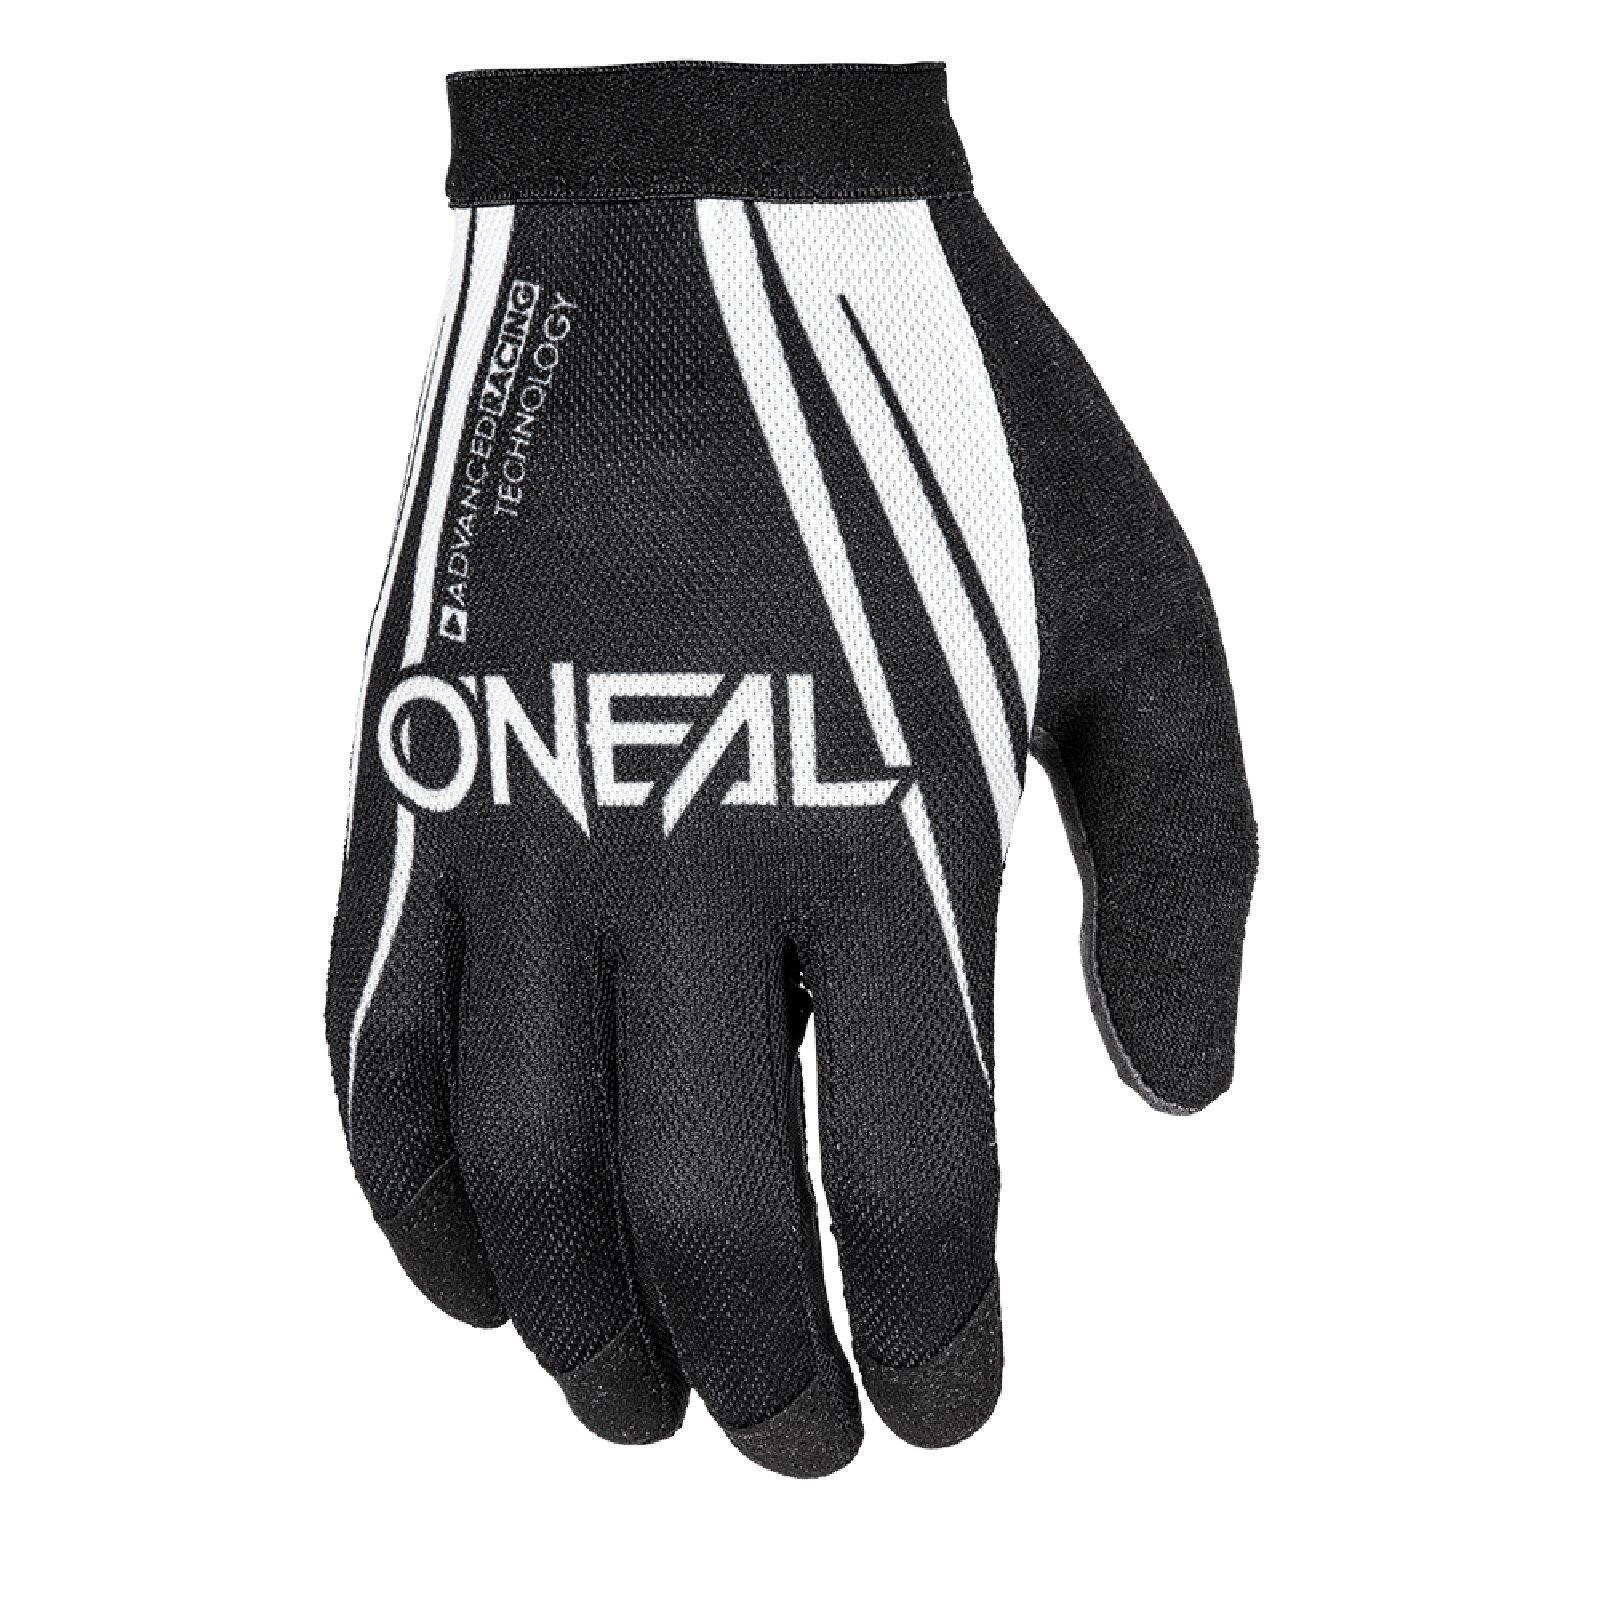 L O`Neal Oneal Butch Carbon Handschuh weiss Enduro Cross DH Freeride BMX  Gr